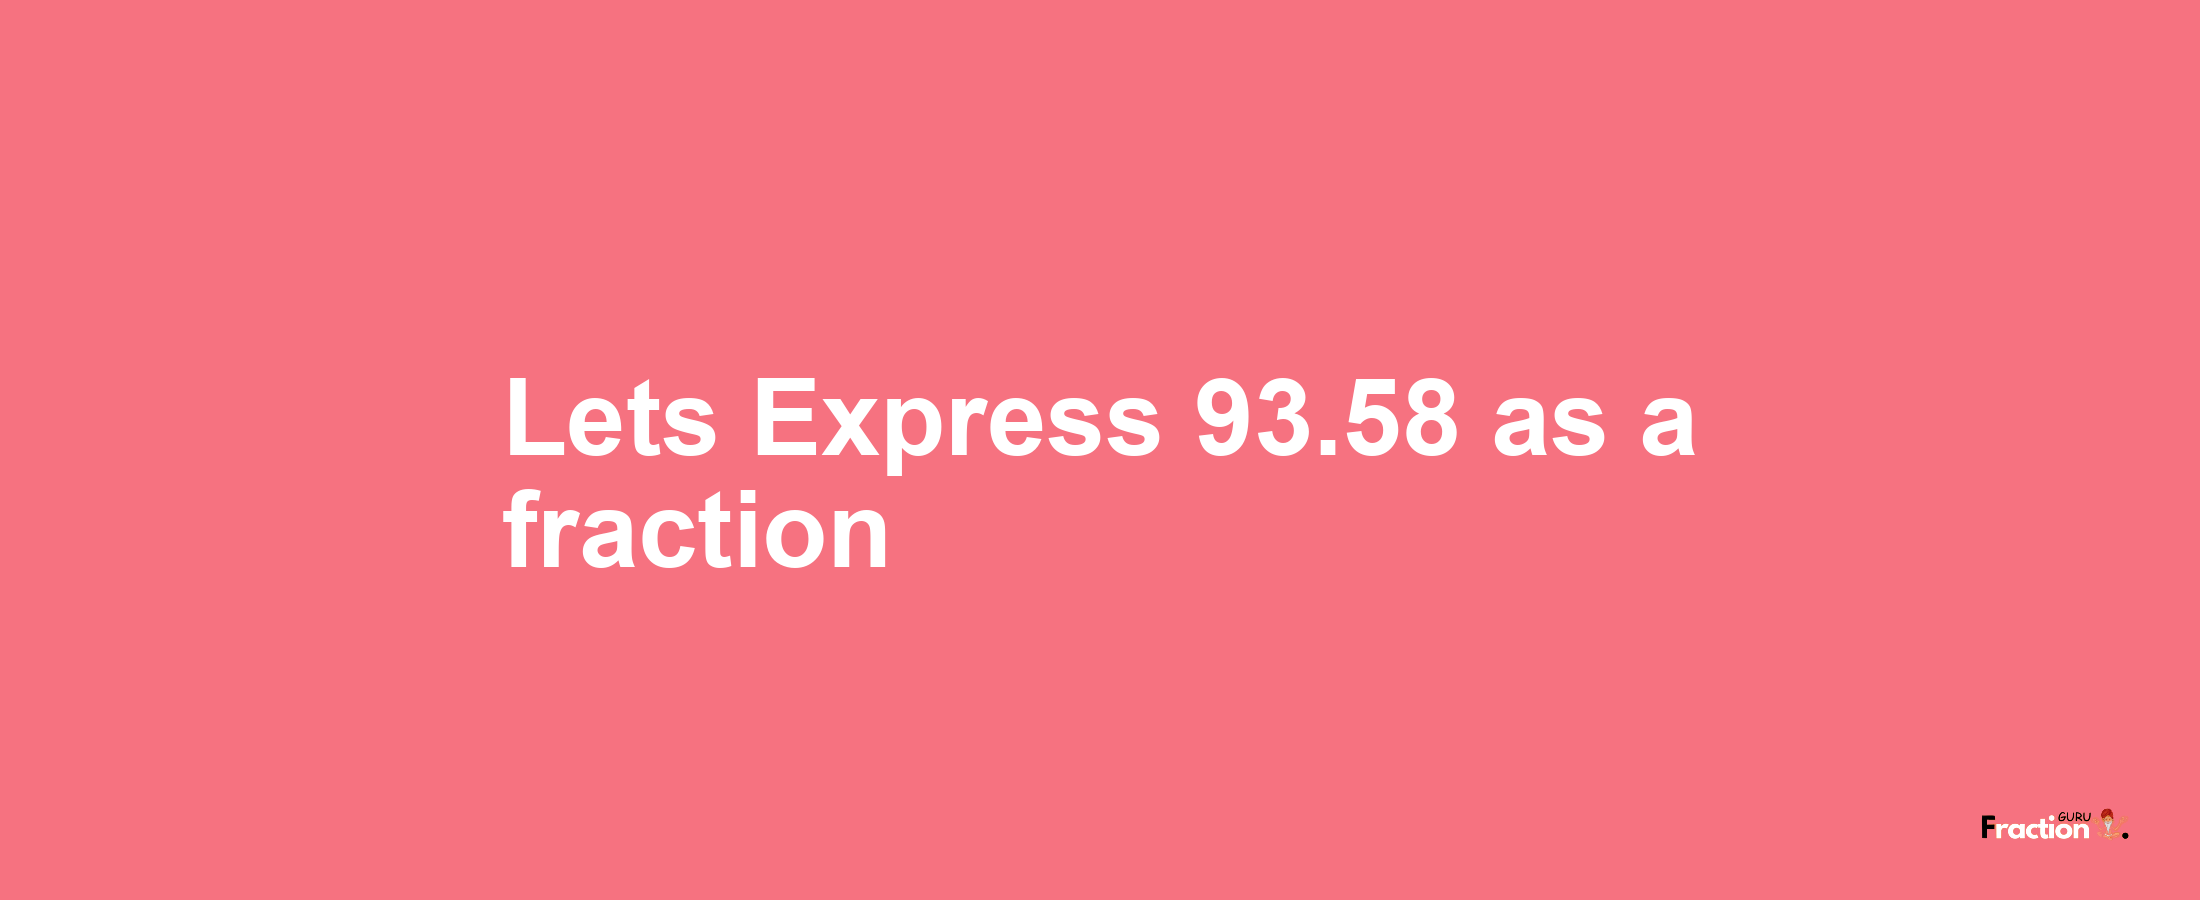 Lets Express 93.58 as afraction